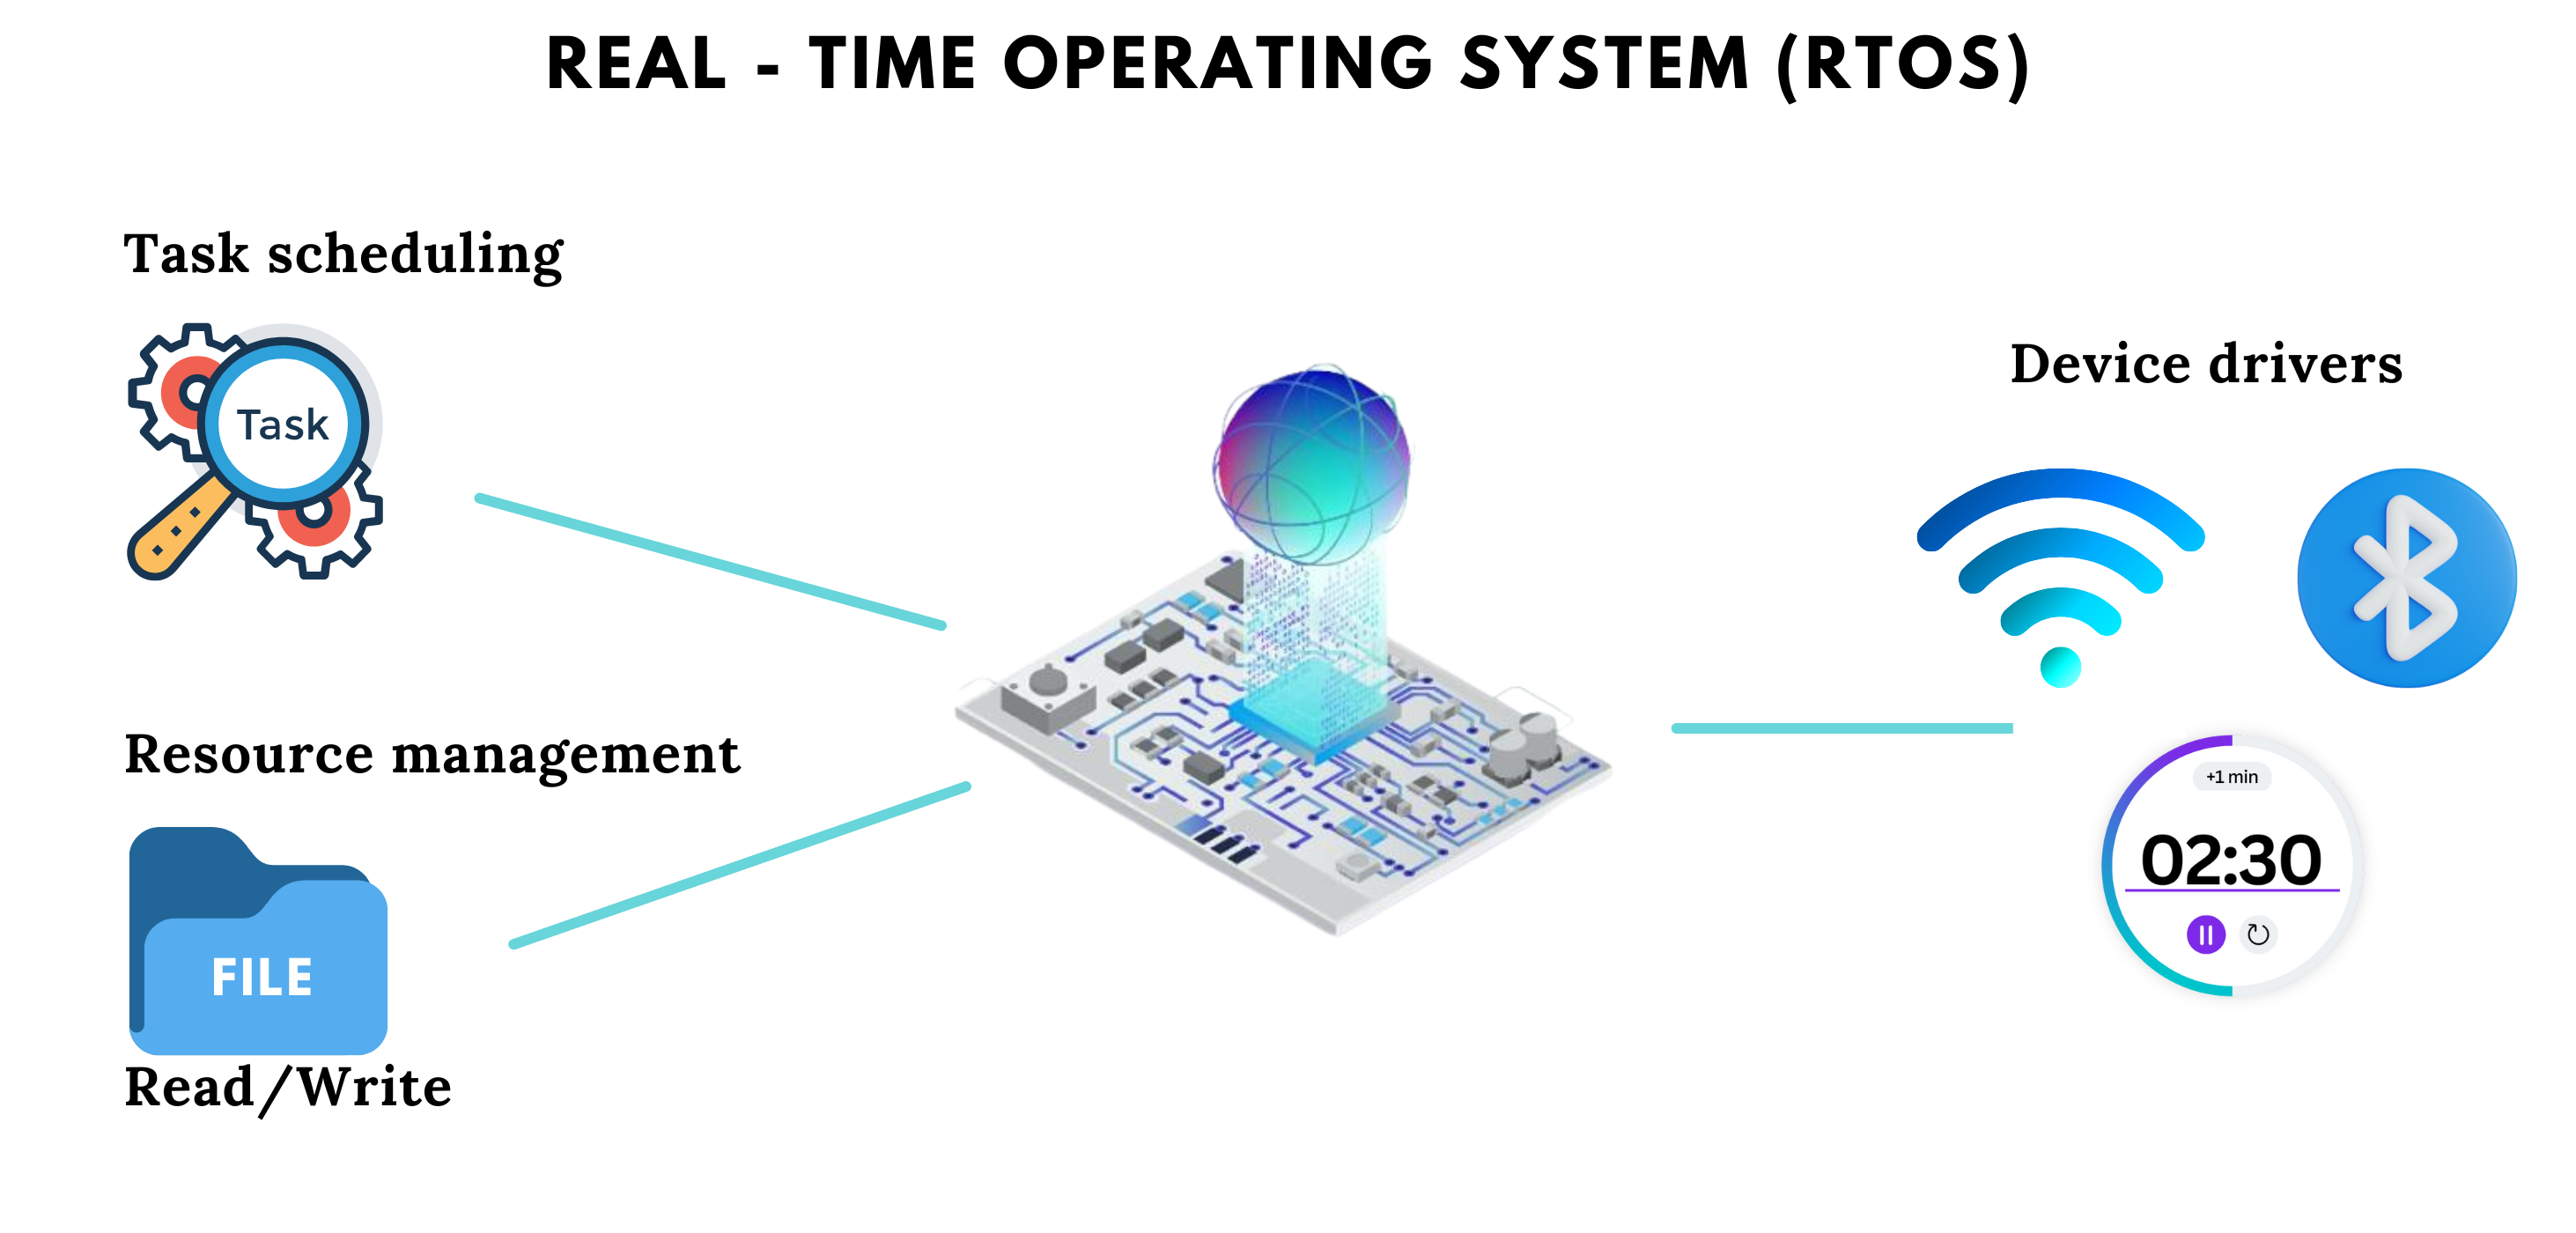 REAL - TIME OPERATING SYSTEM (RTOS)